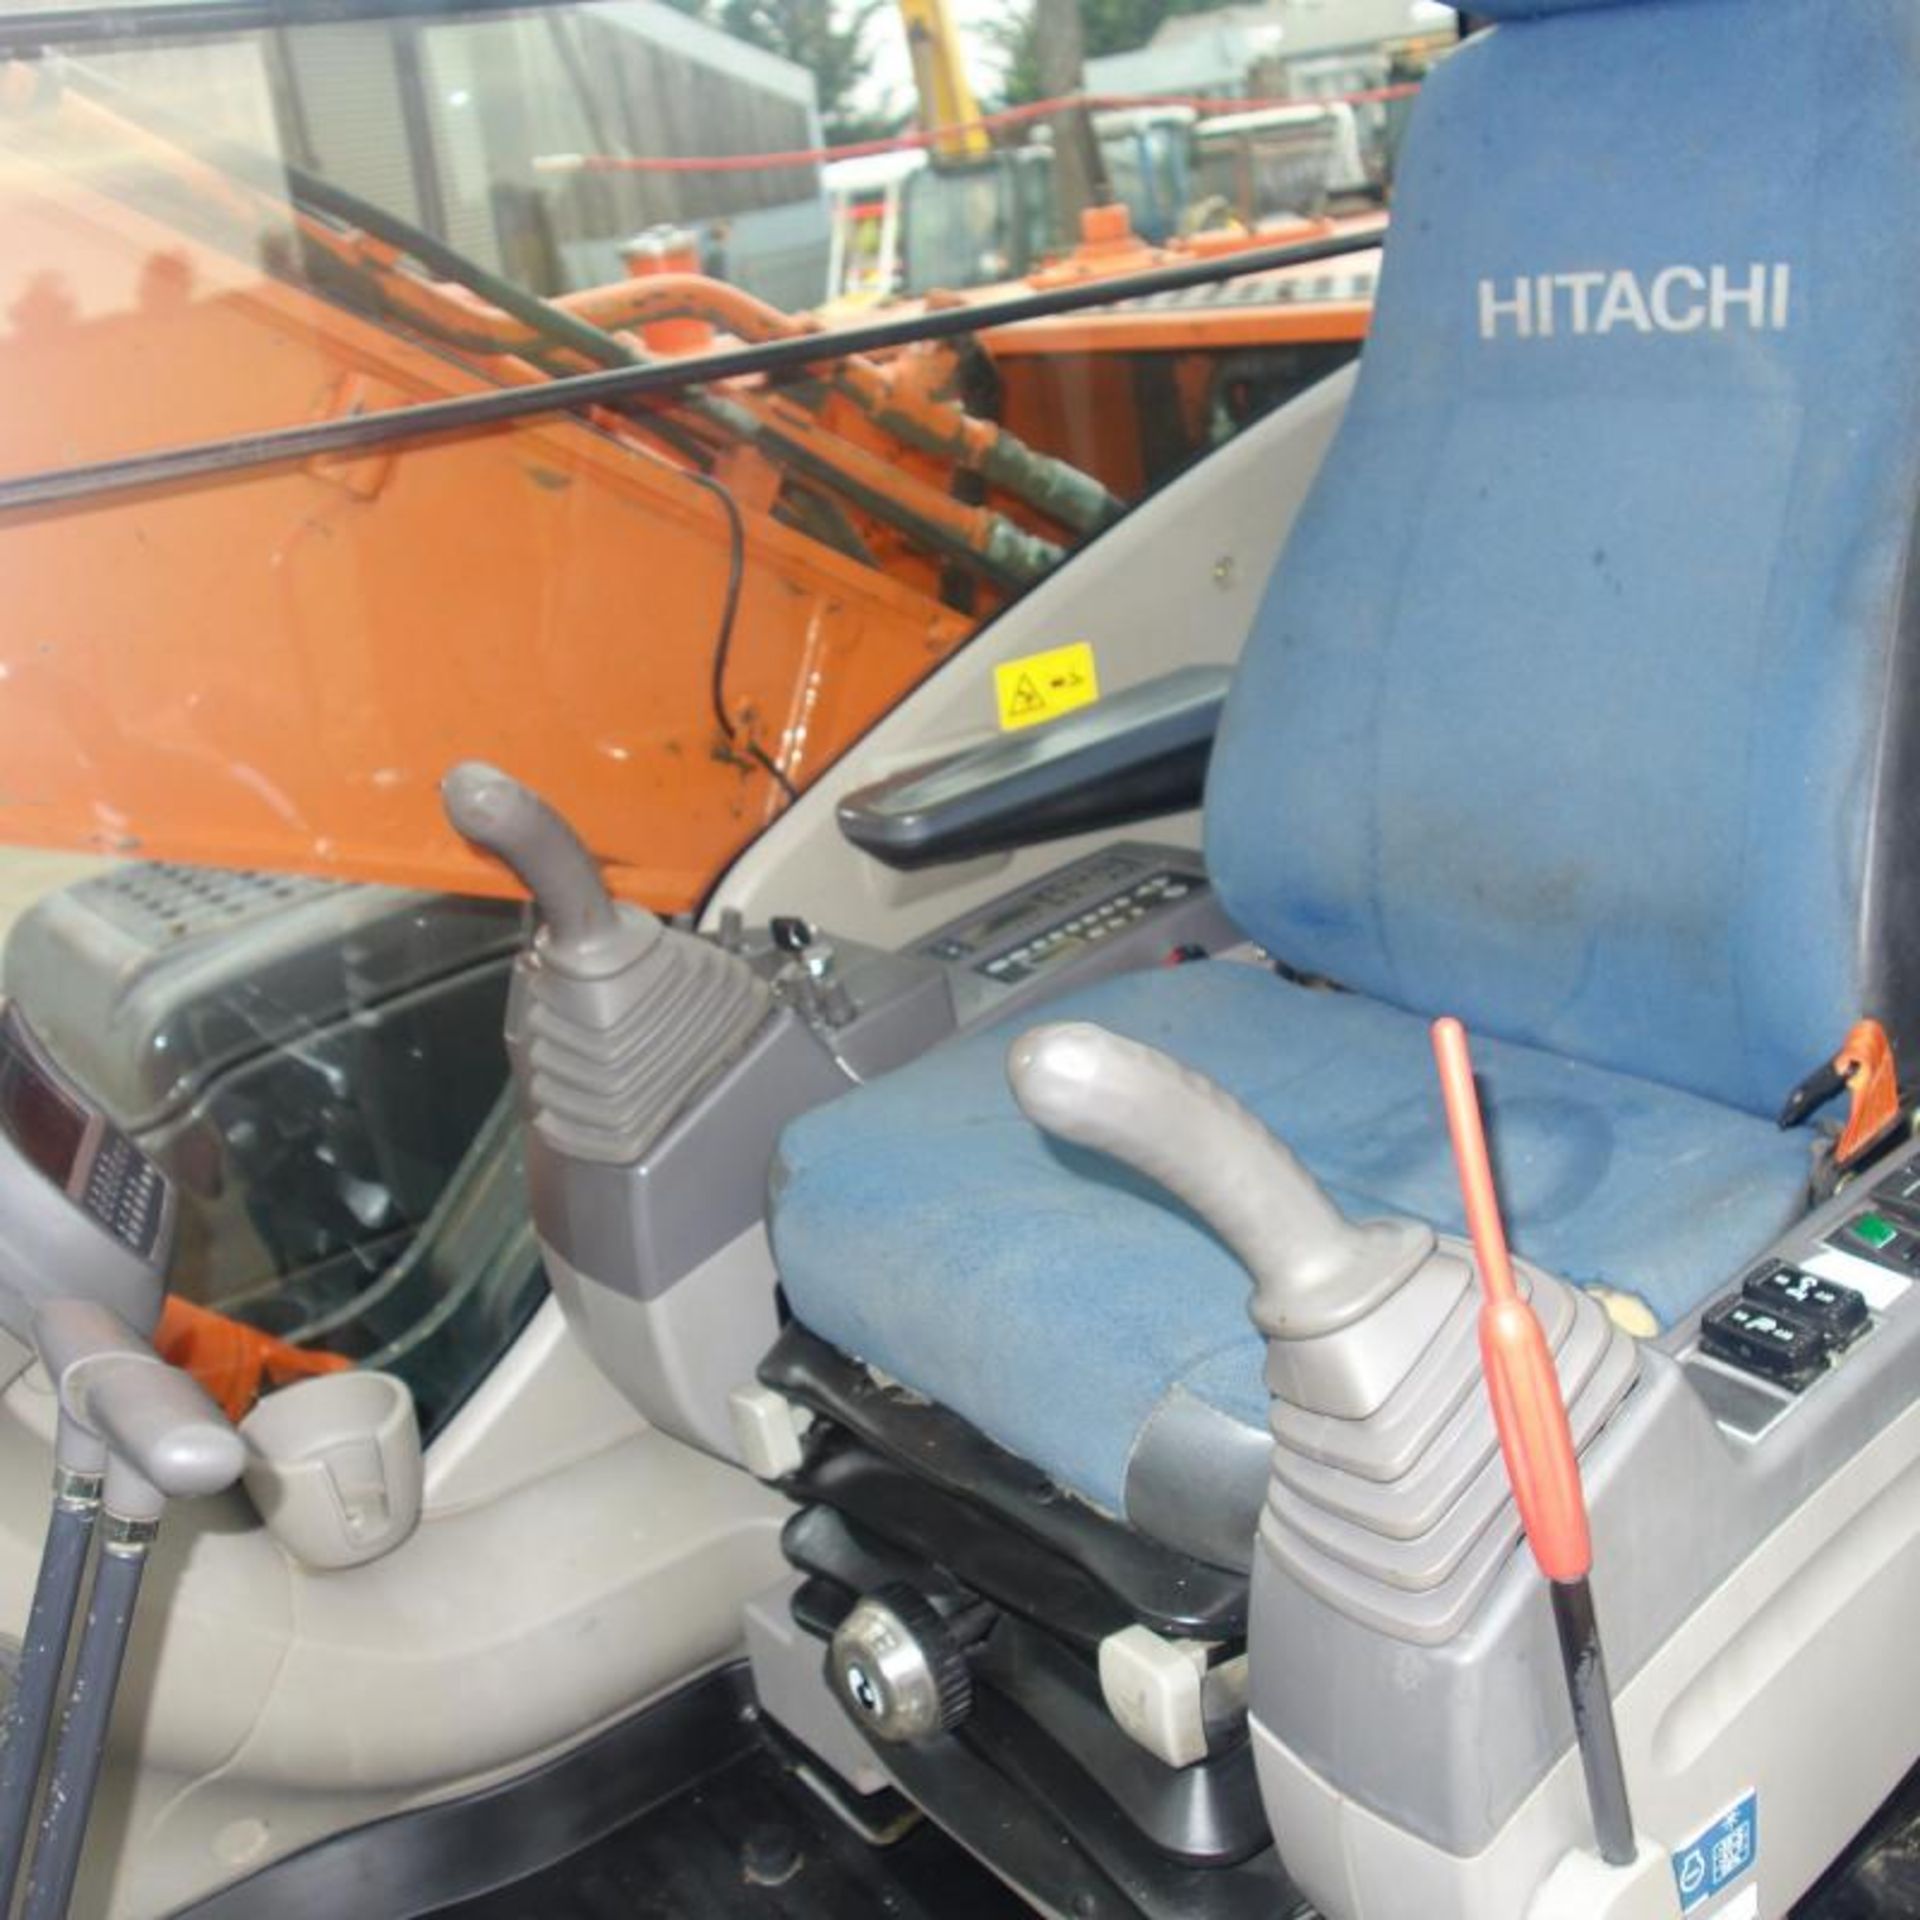 2012 Hitachi Zaxis ZX280LC-3 Digger - Image 8 of 16